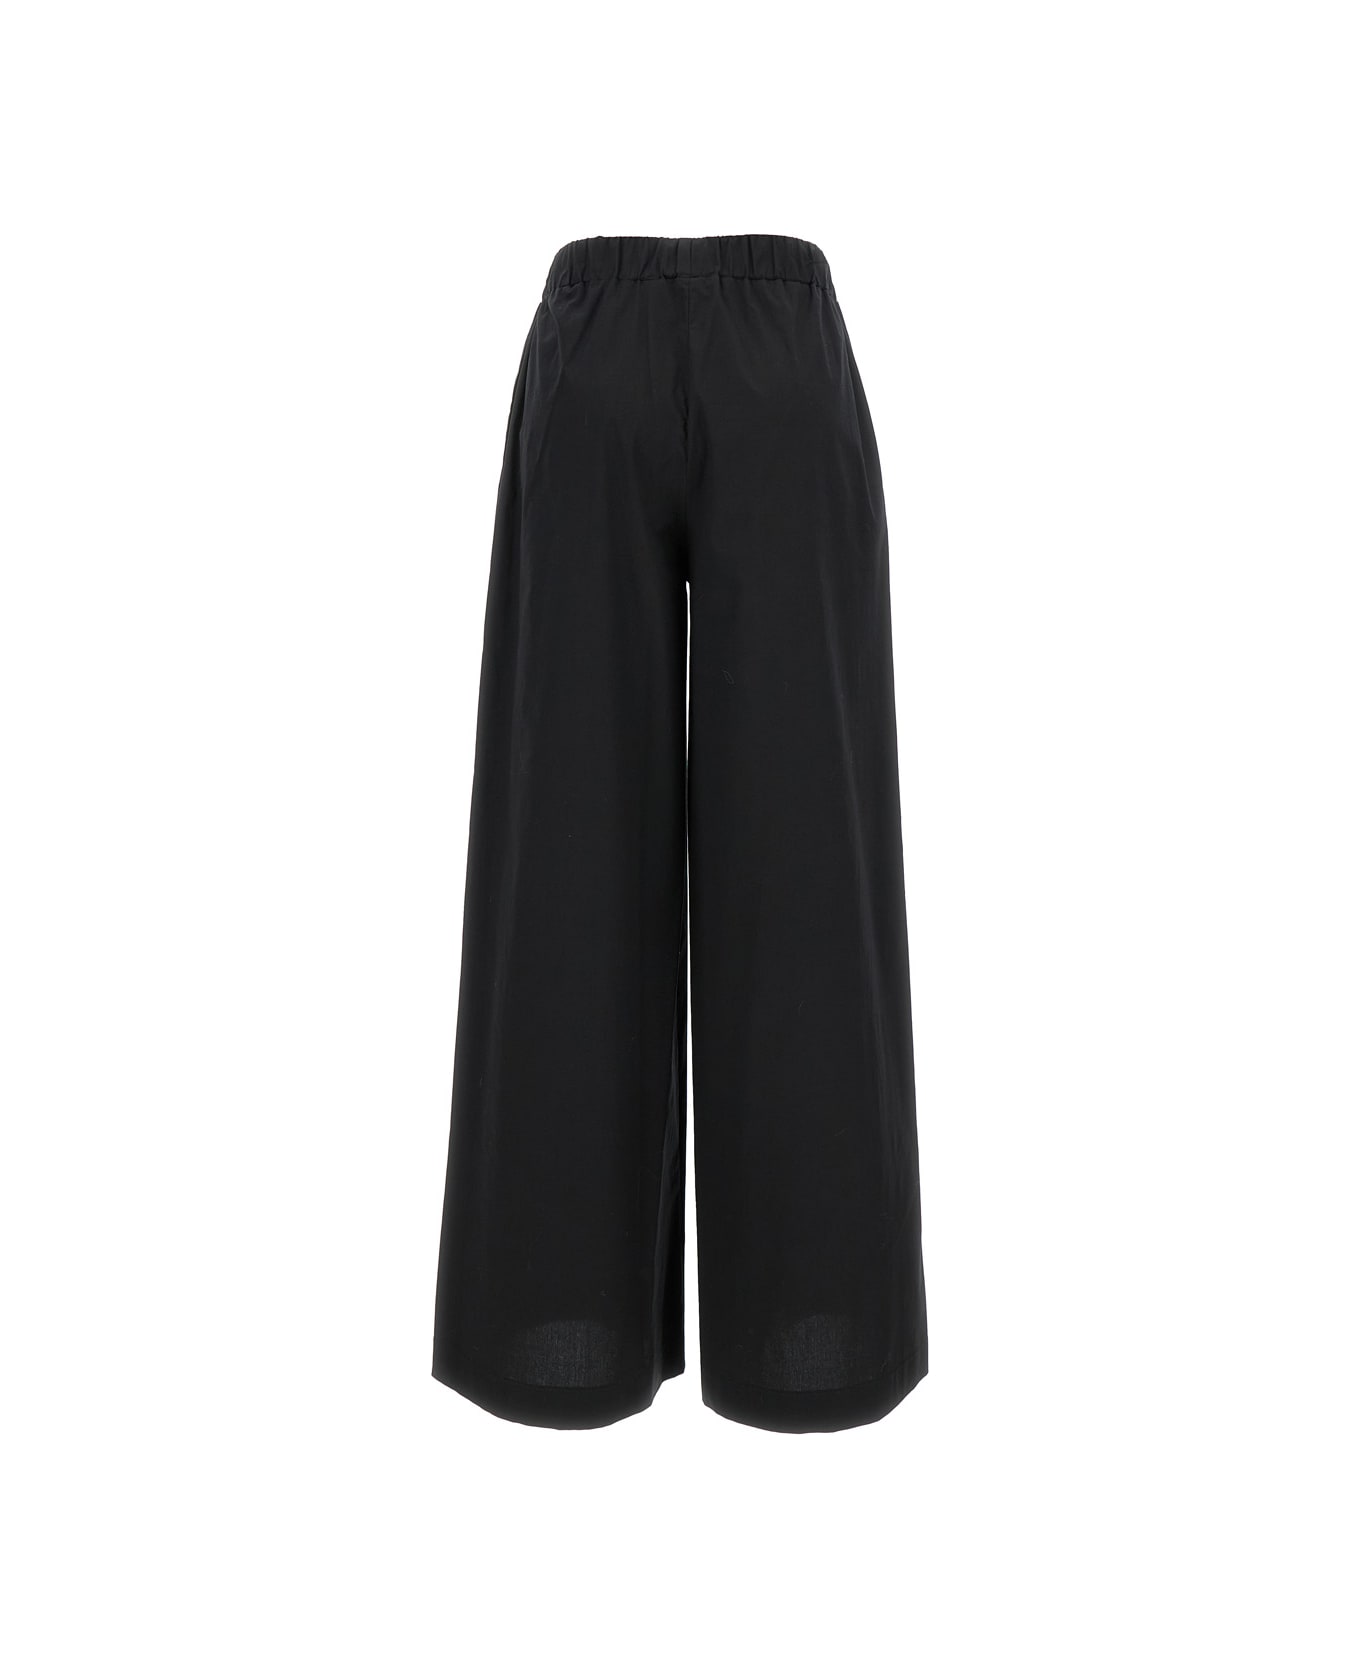 Federica Tosi Black Elastic High-waisted Pants In Stretch Cotton Woman - Black